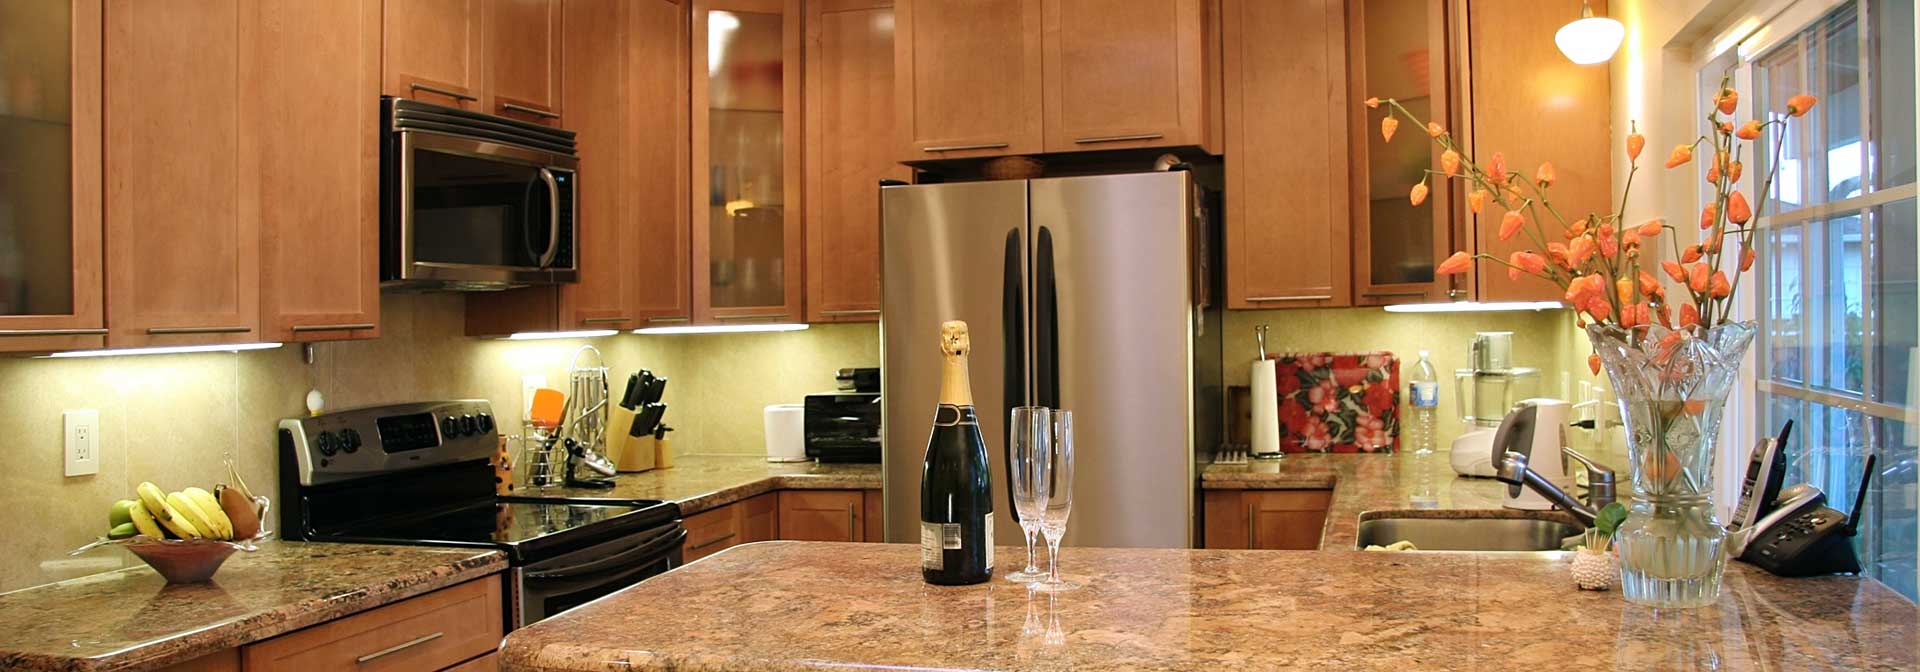 Kitchen with bottle of champagne and two glasses on the counter